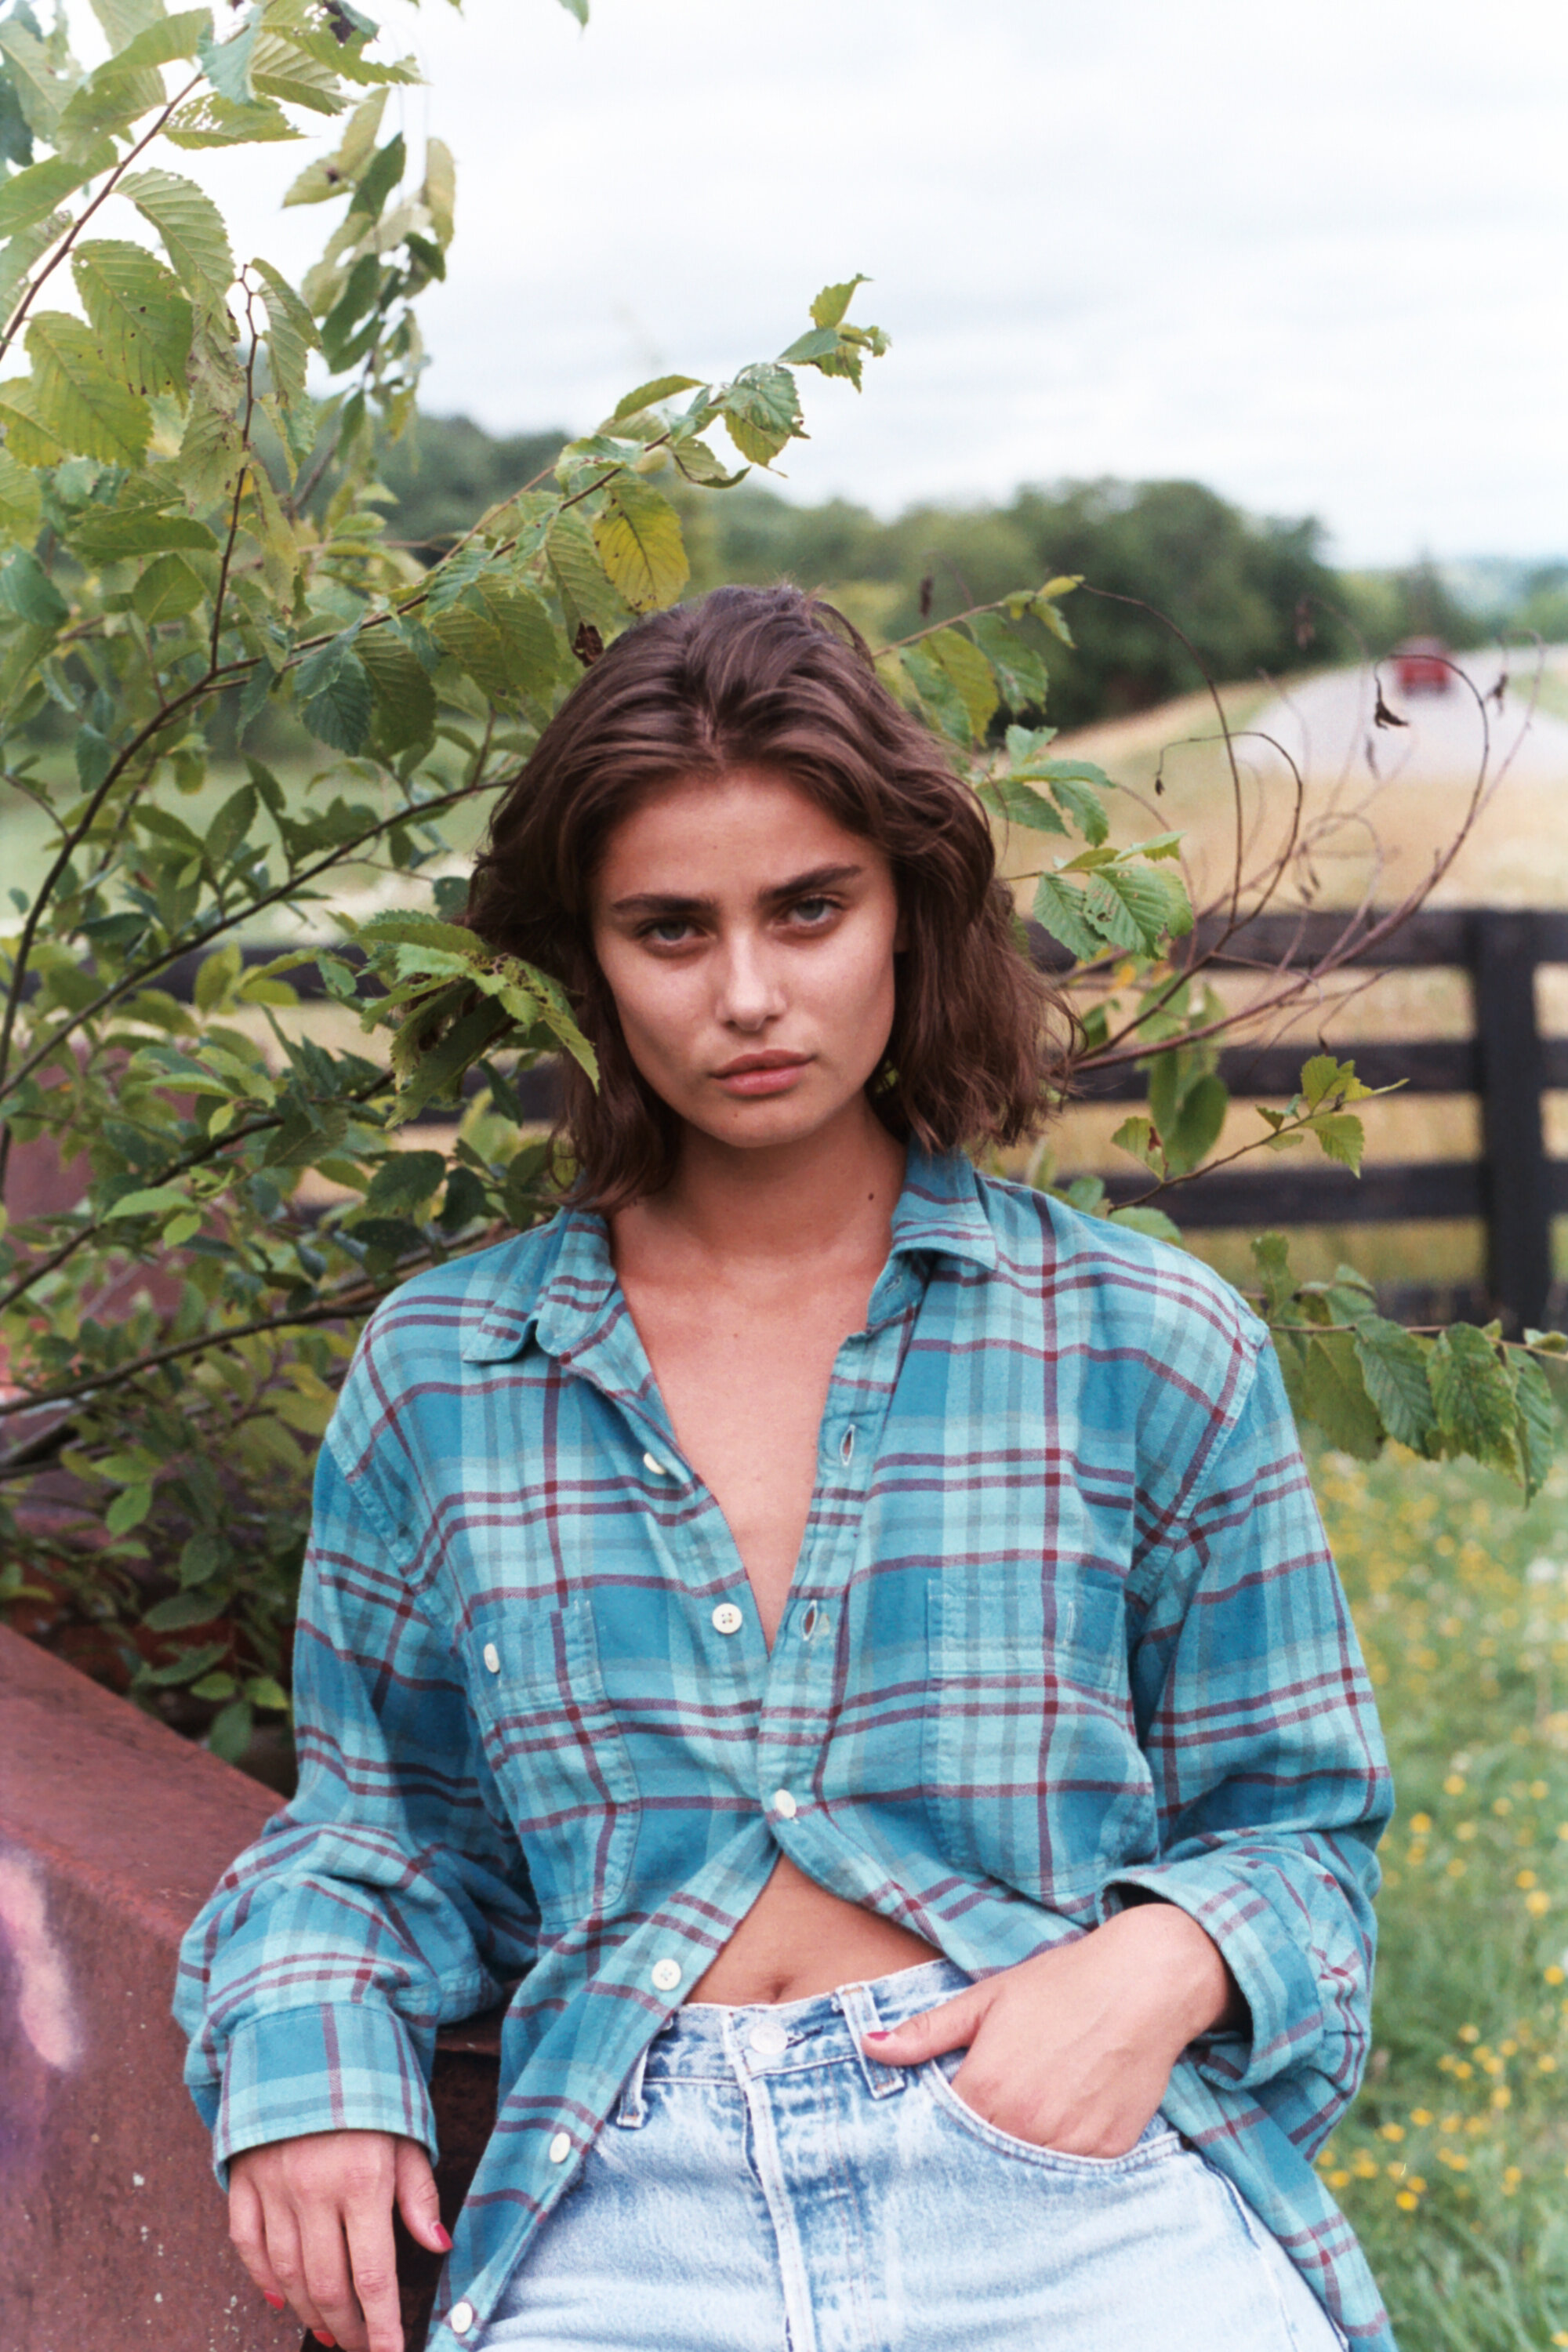 Photo n°6 : Taylor Hill la country girl!